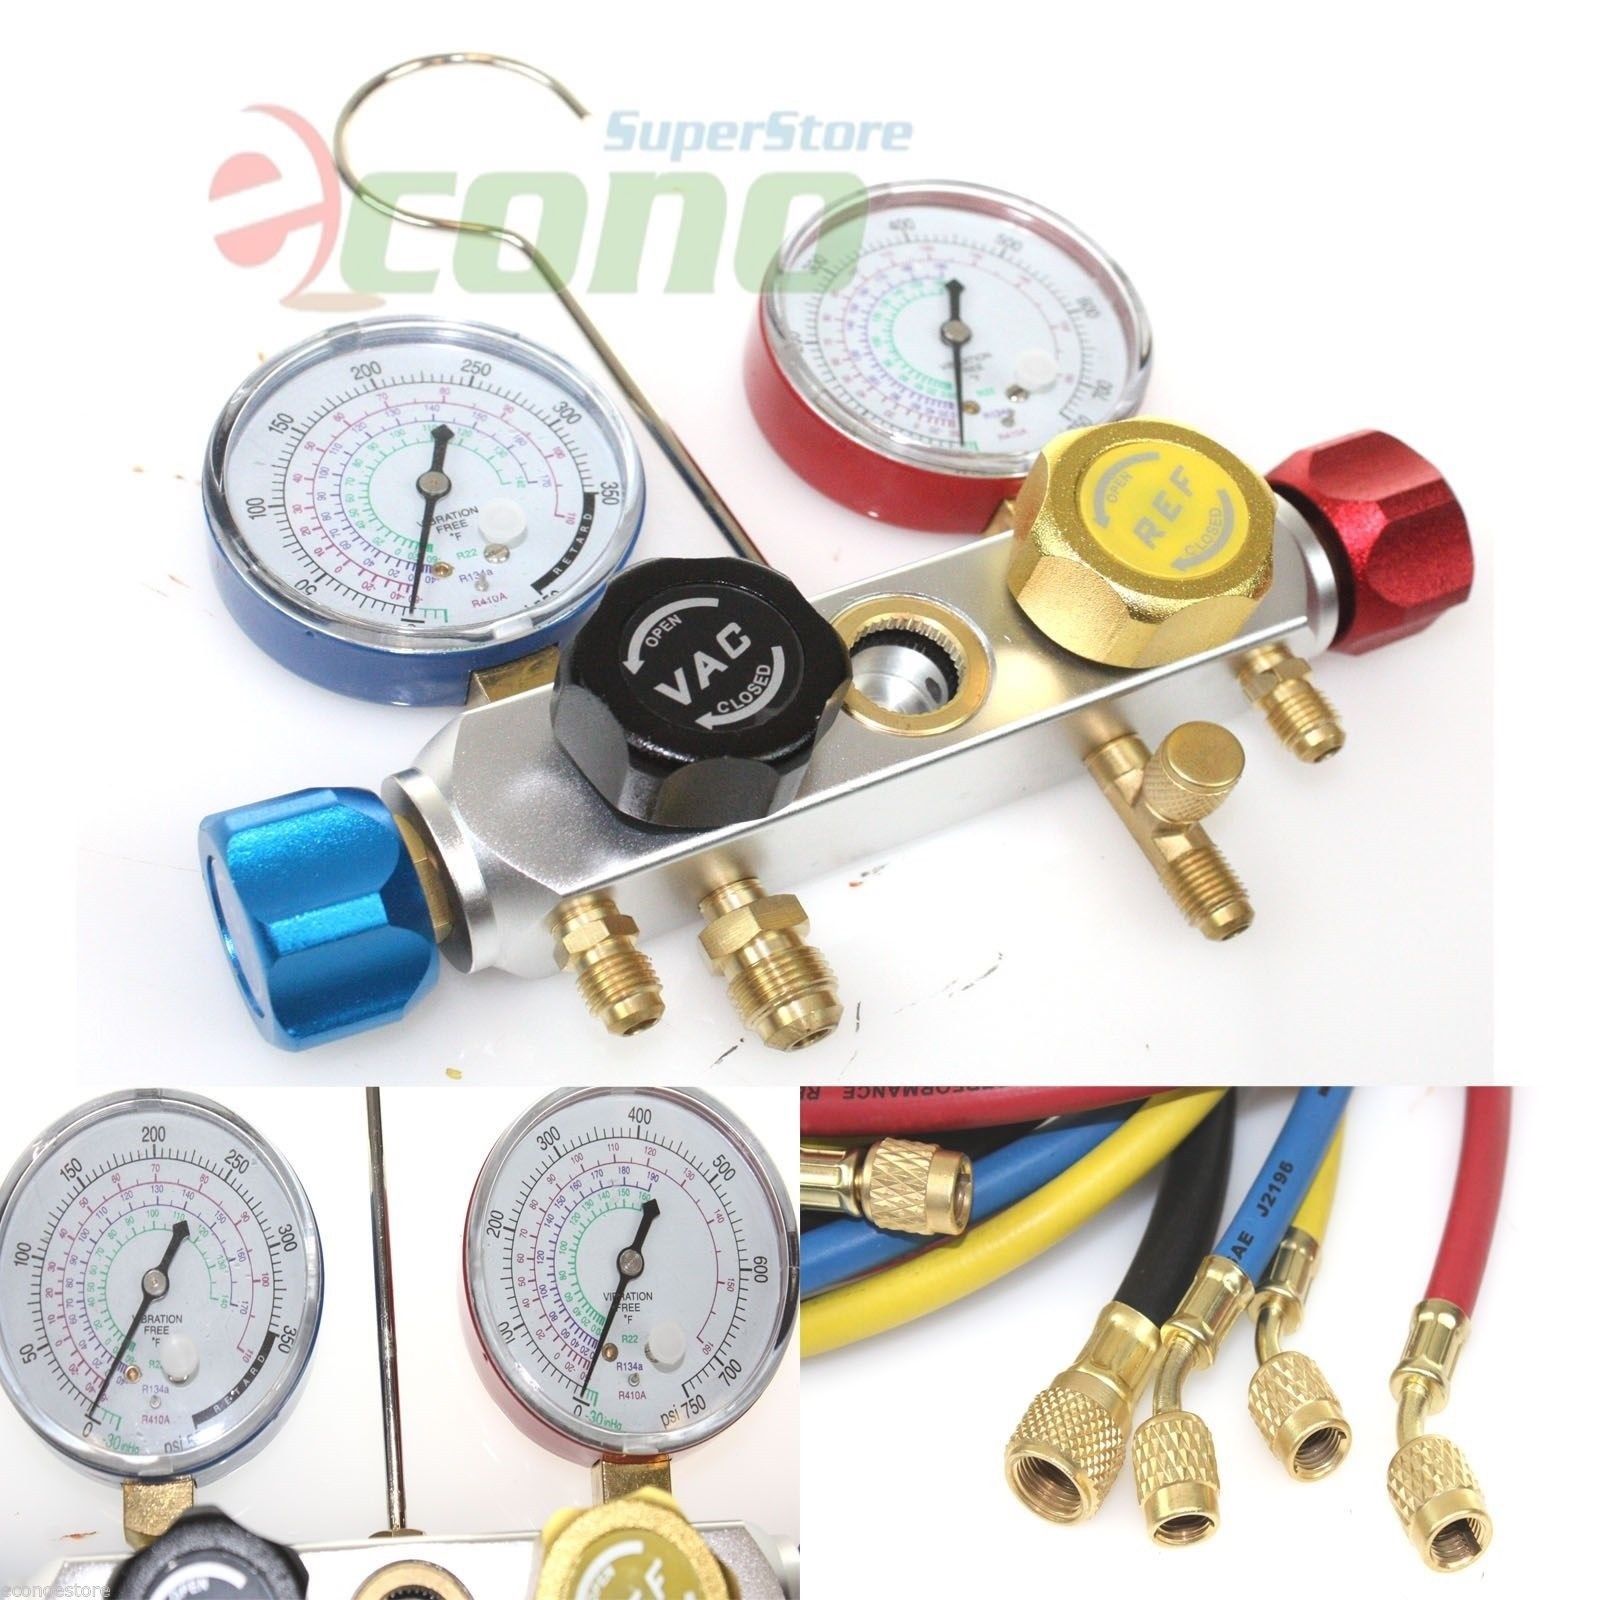 4 Way AC Manifold Gauge Set R134A R12,R22,R134a w/Hoses Coupler Adapters 1/2" 